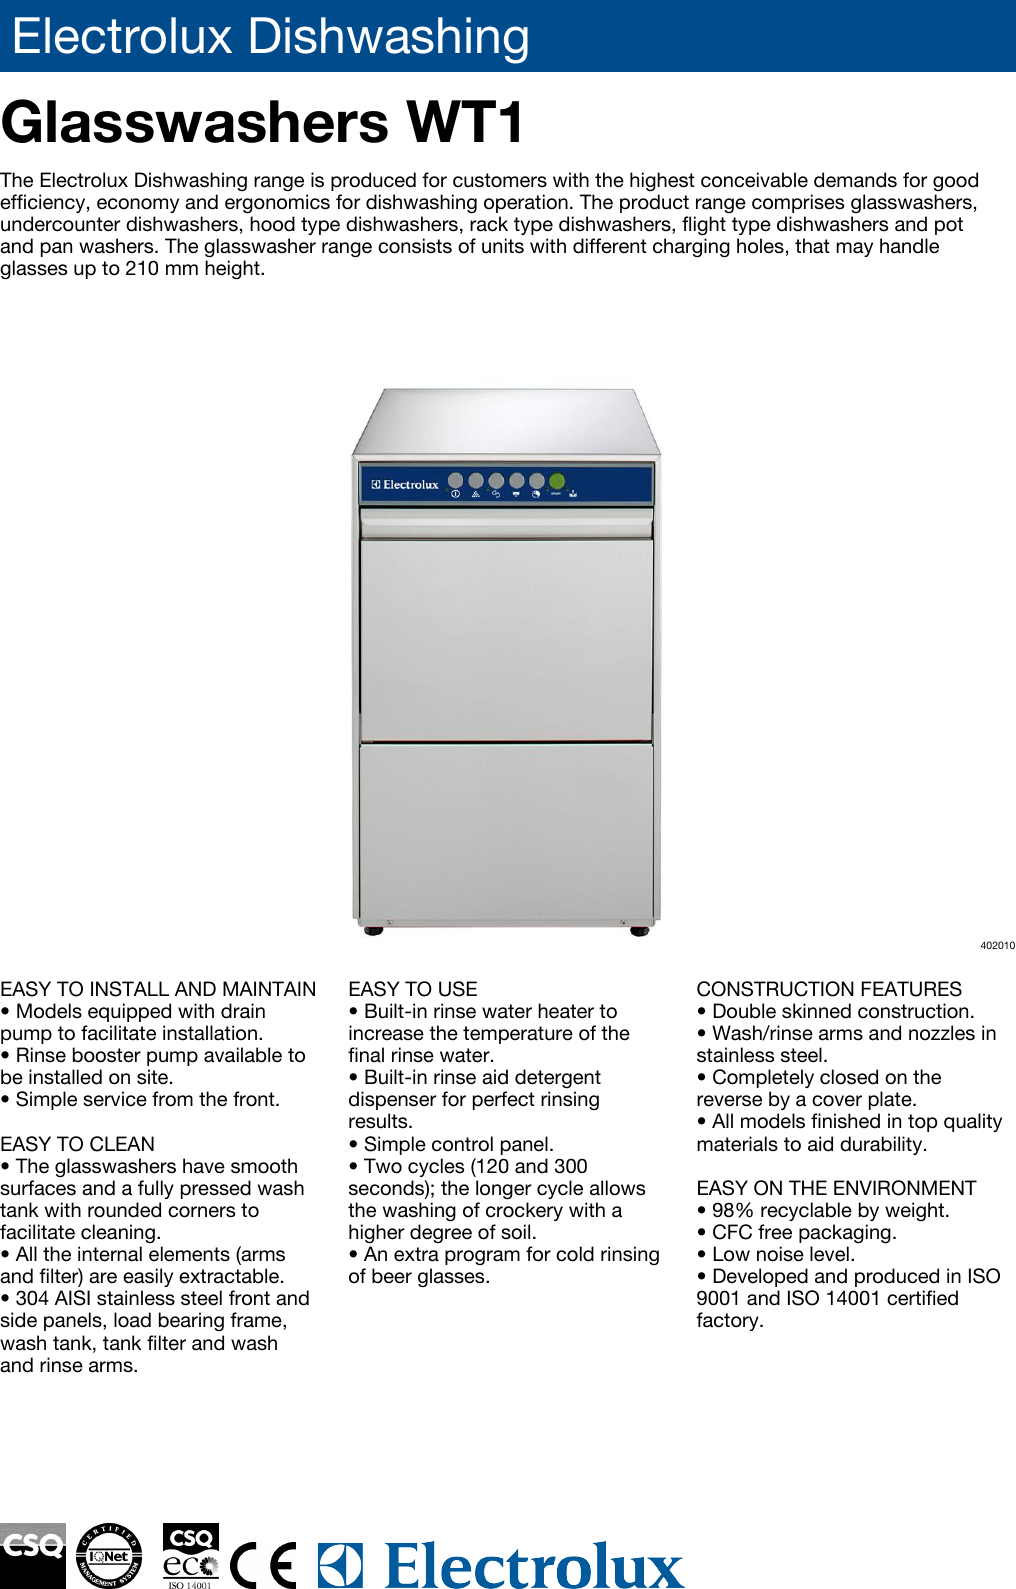 Page 1 of 4 - Electrolux Electrolux-402010-Users-Manual- Dishwashing  Electrolux-402010-users-manual